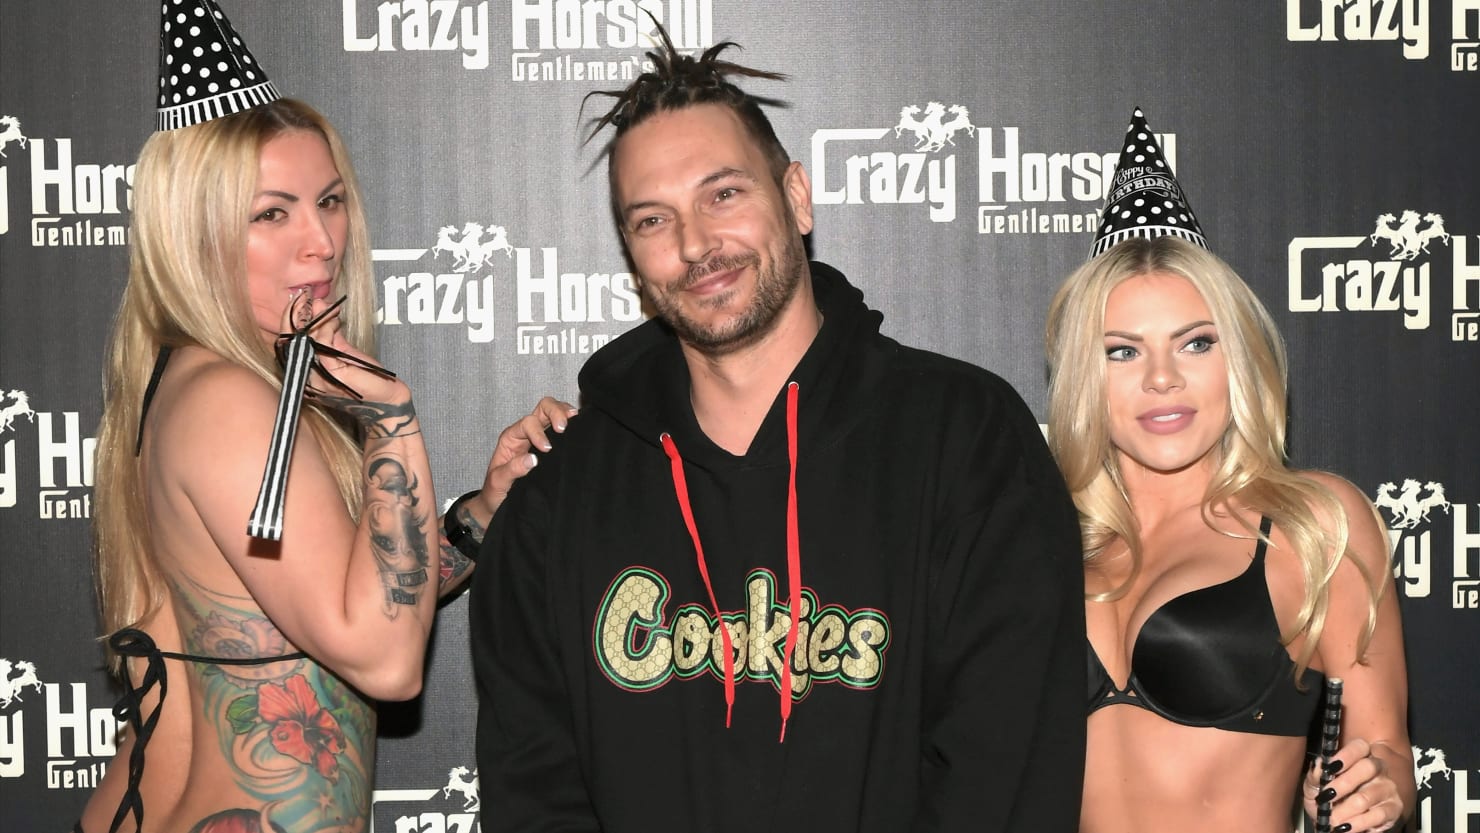 Kevin Federline Needs to Keep Britney Spears' Name Out of His Mouth - The Daily Beast